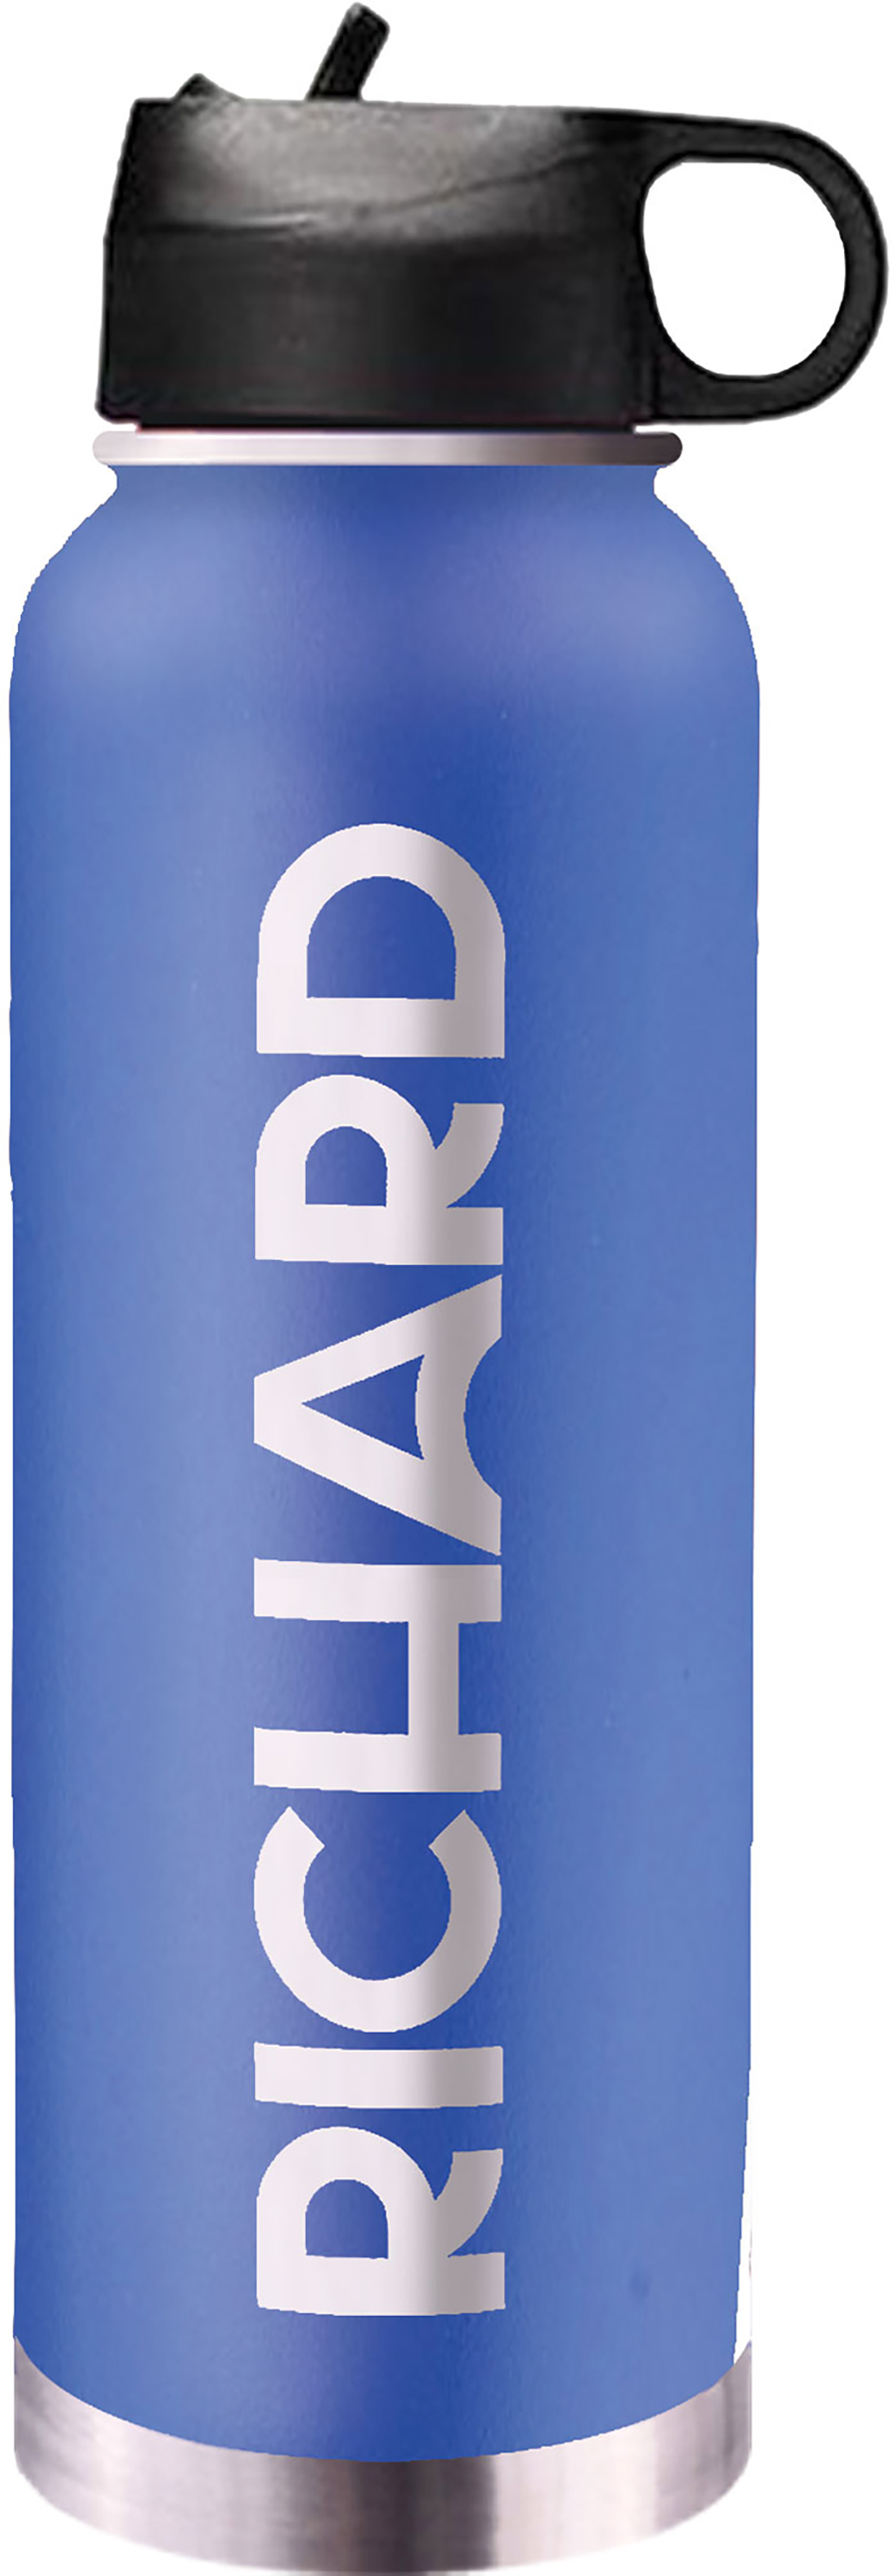 Tahoe© 32 oz. Insulated Water Bottle - Royal Blue